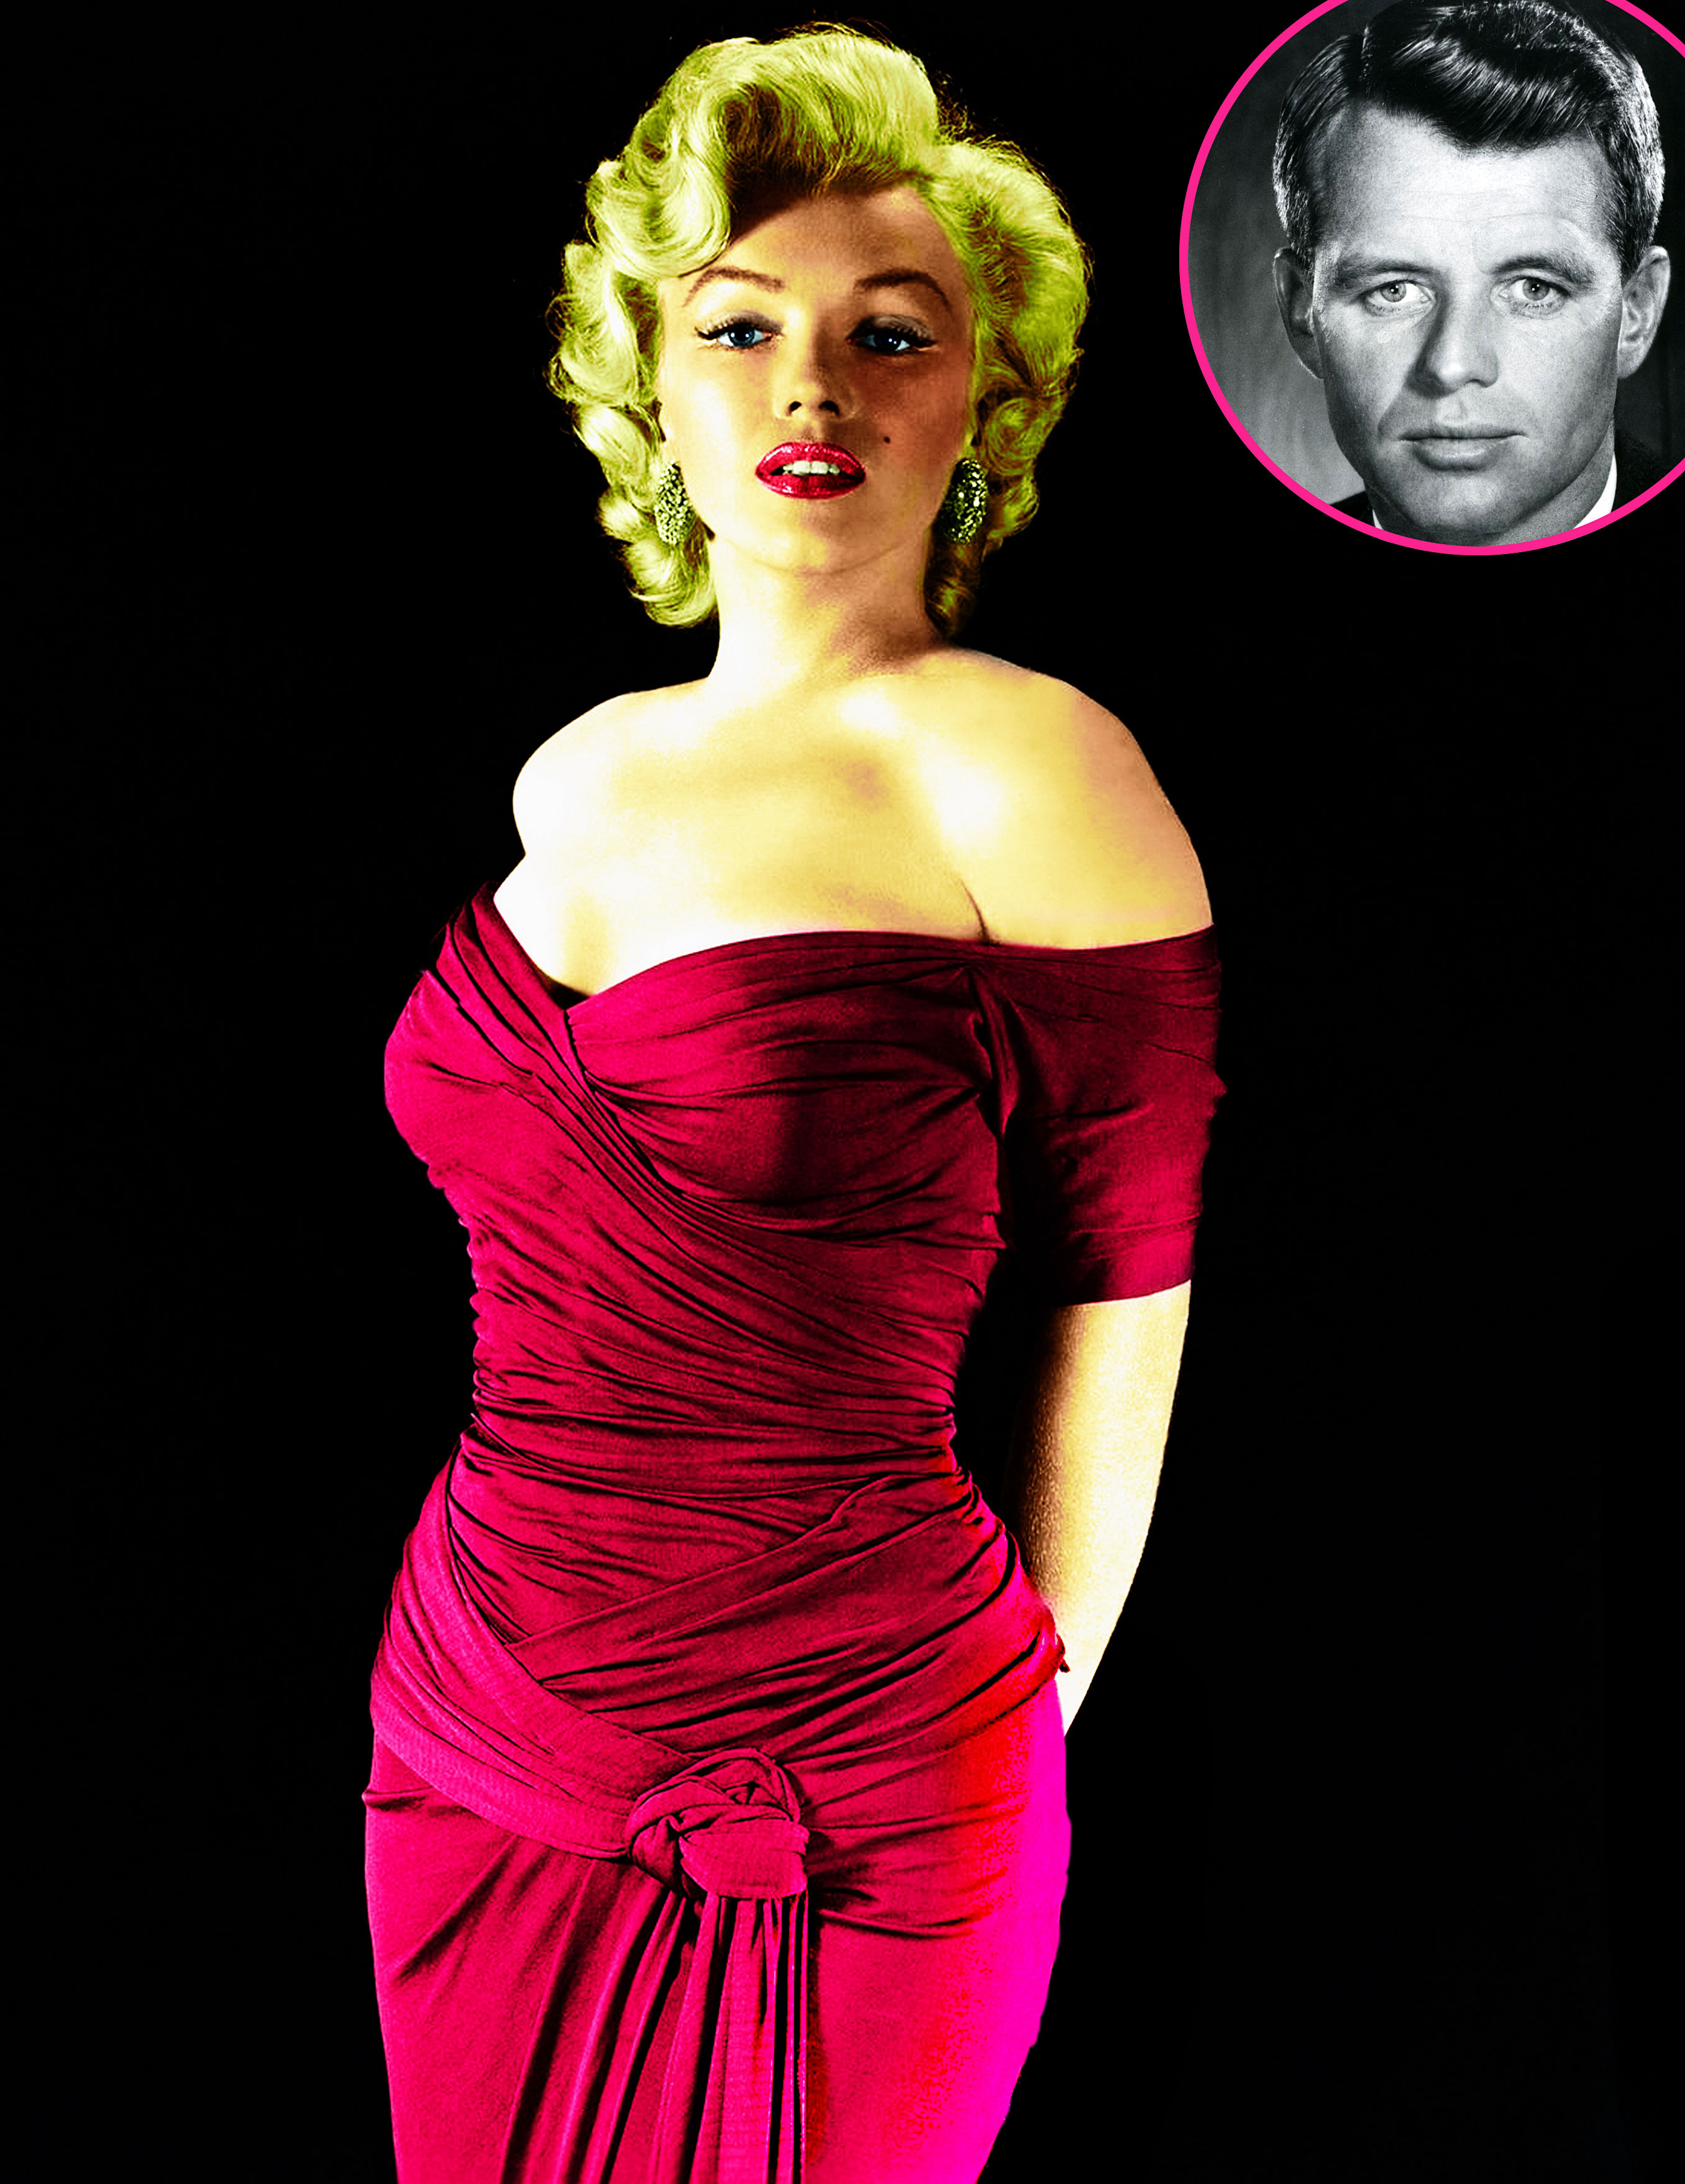 Was Marilyn Monroe Murdered by the Kennedys? 